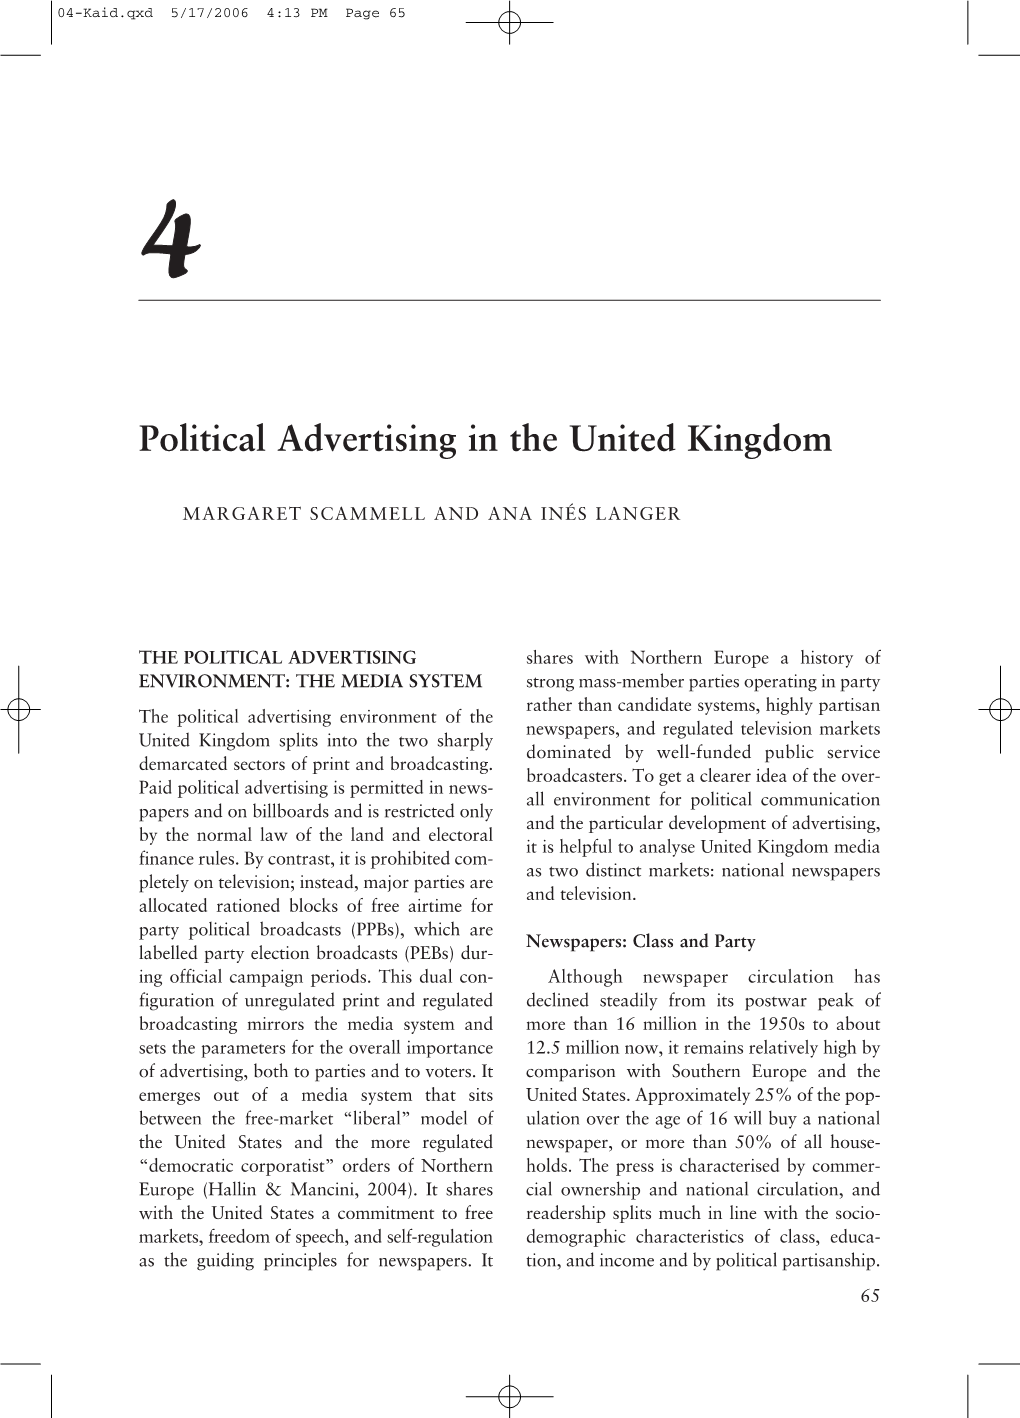 Political Advertising in the United Kingdom